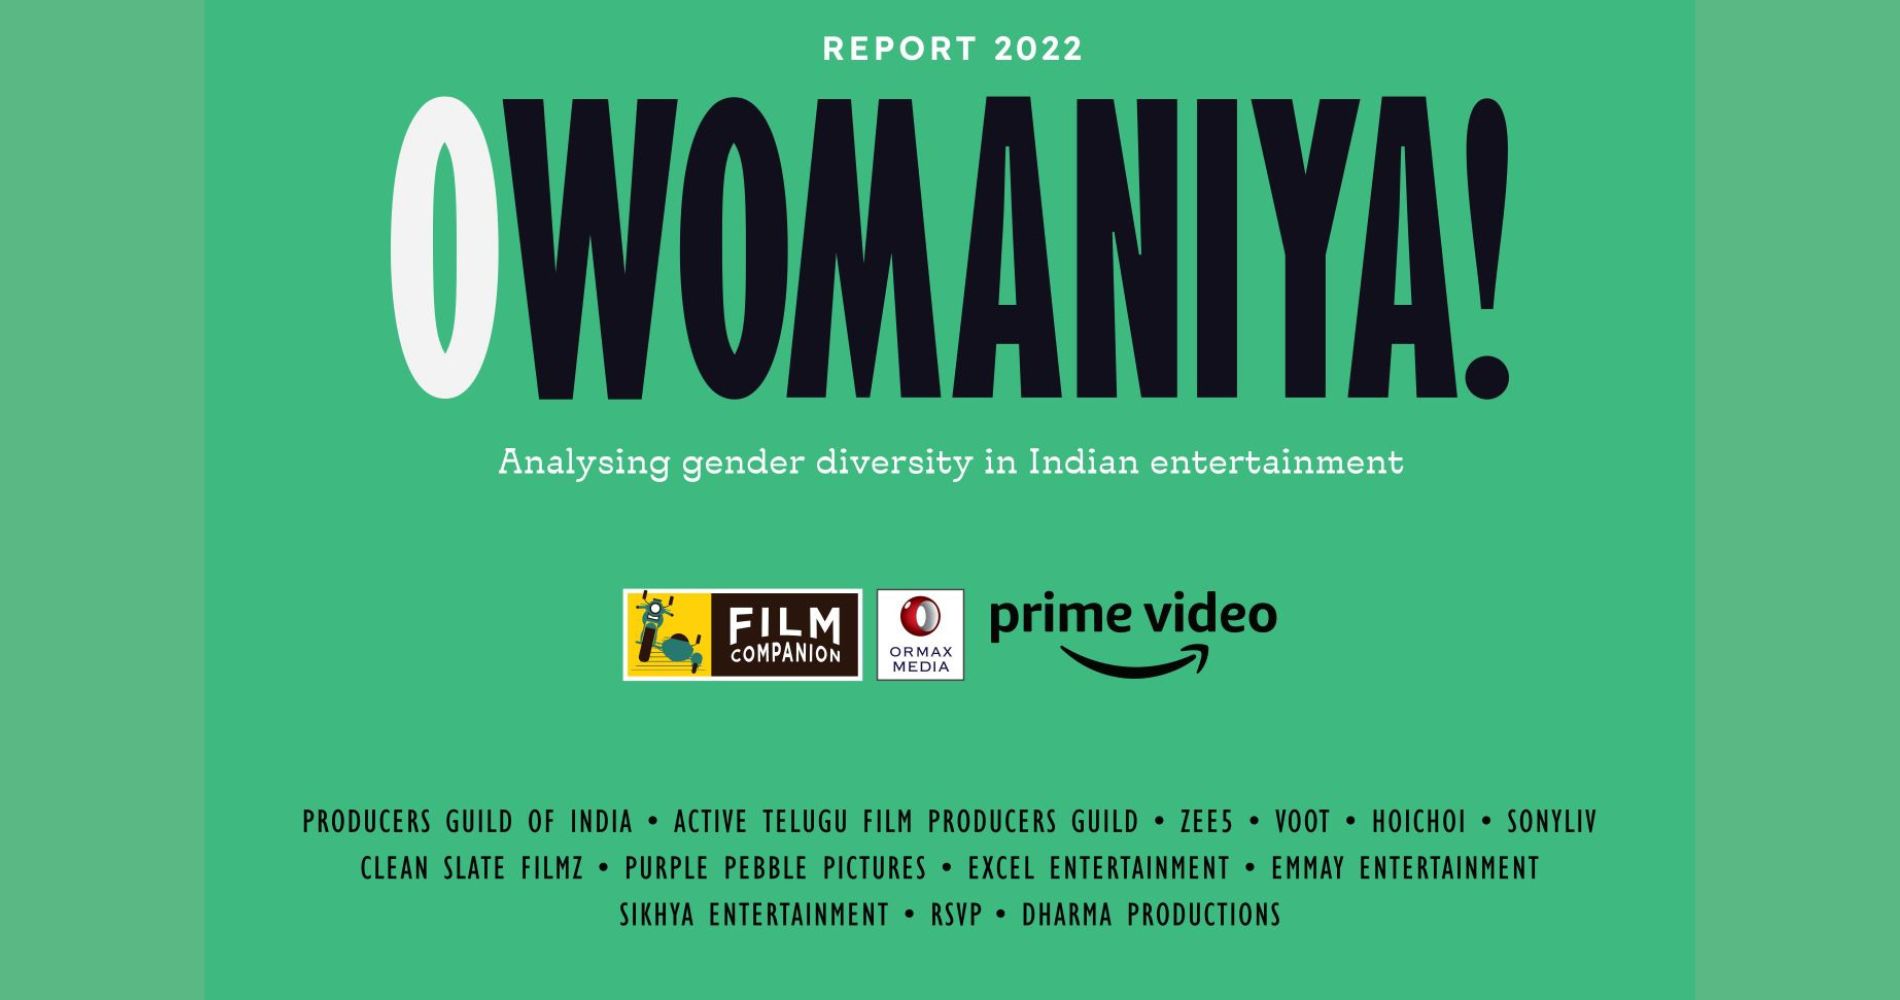 Amazon Prime Video announcing the launch of the O Womaniya! 2022